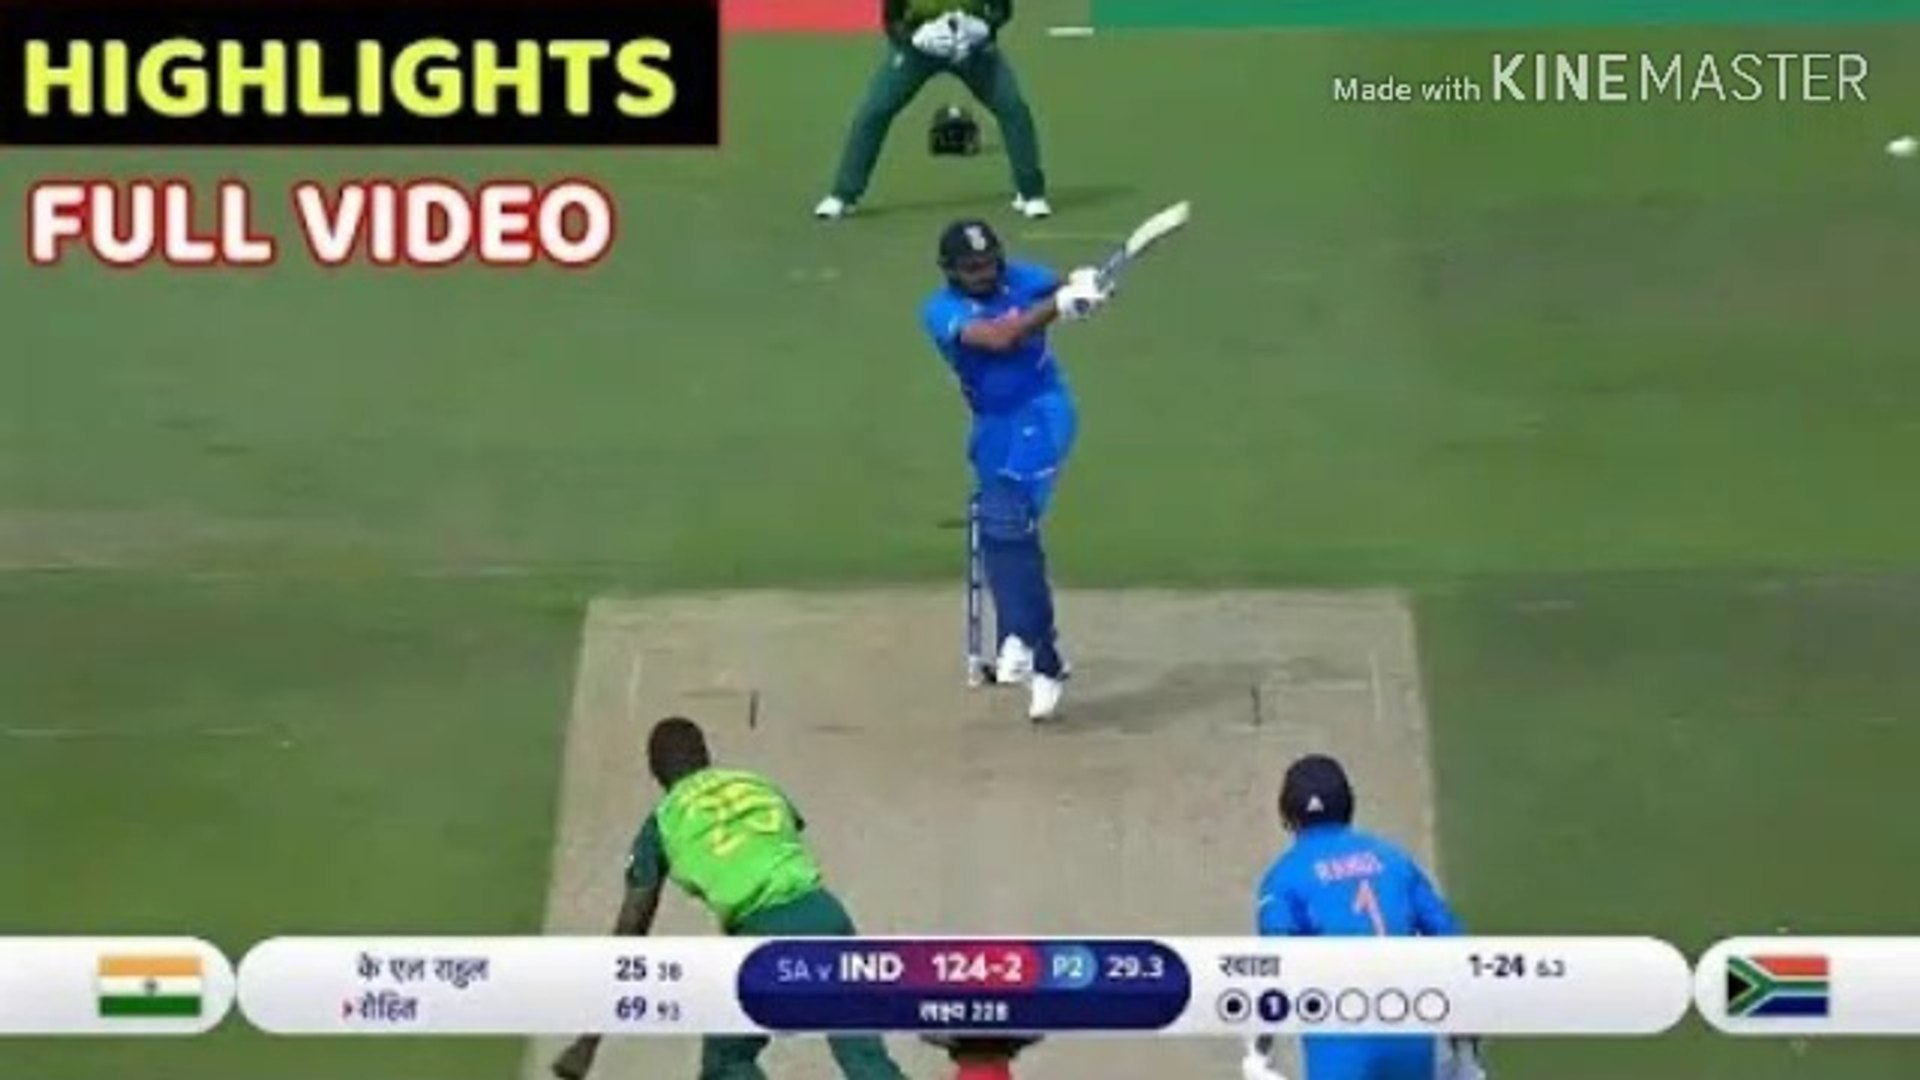 India vs South Africa Full Match Highlights World cup 2019 - live cricket 2019